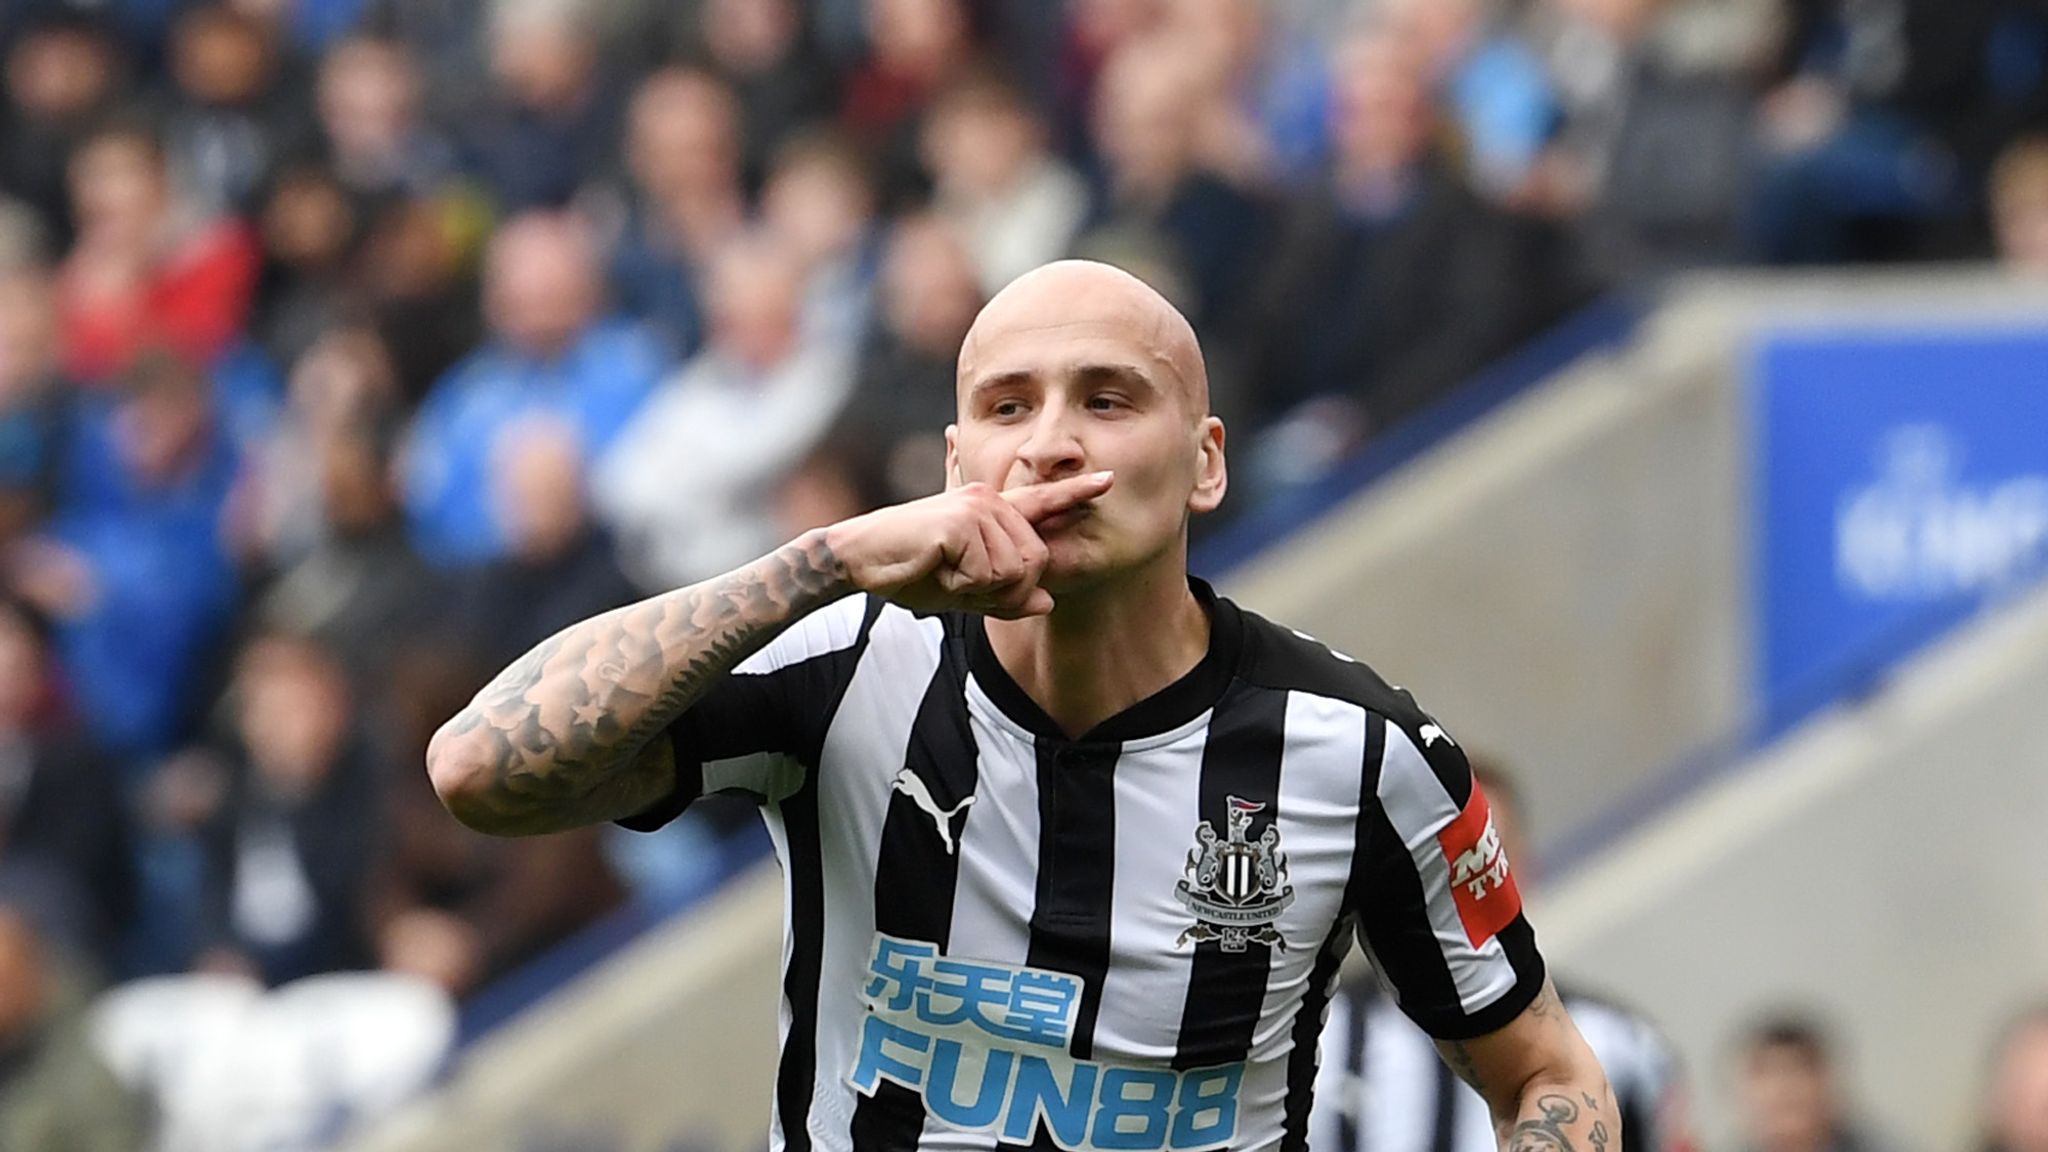 Jonjo Shelvey is England's best passer and deserves chance to prove  himself, says Tony Cottee | Football News | Sky Sports